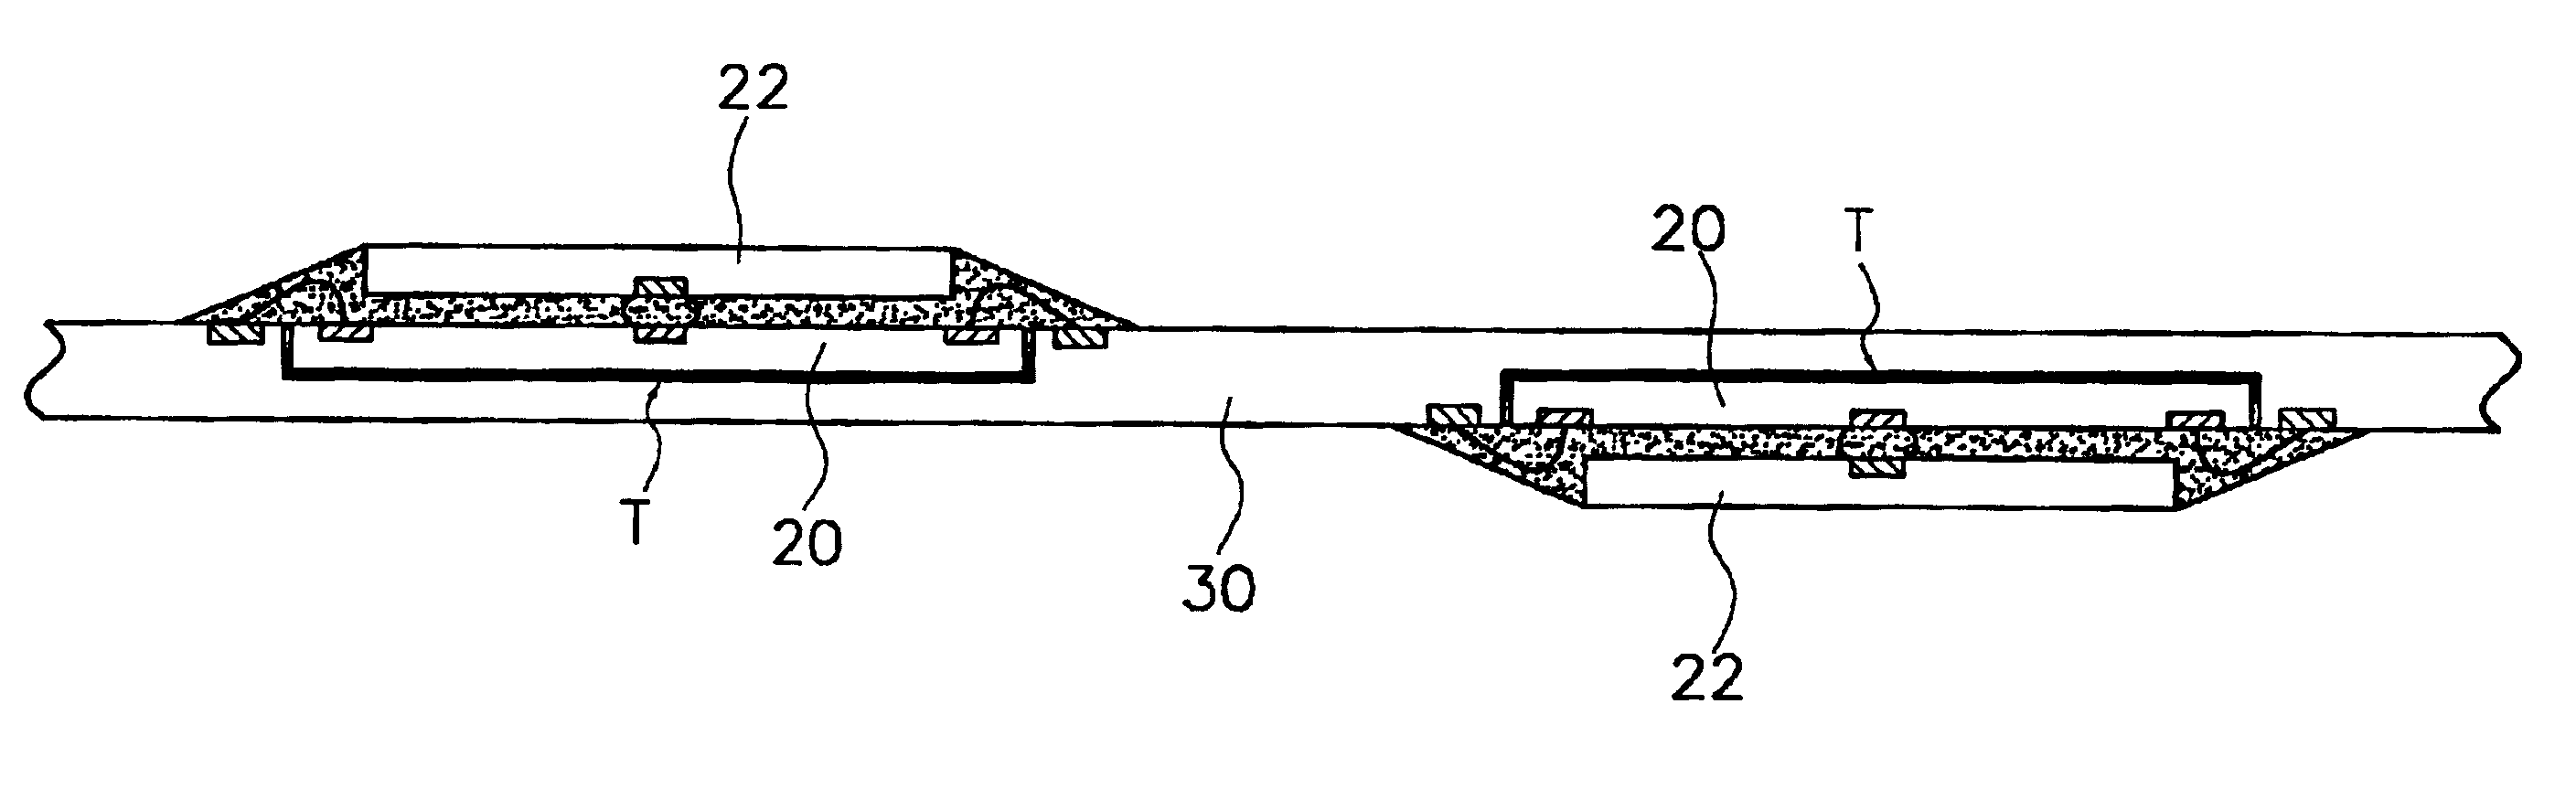 Stack chip module with electrical connection and adhesion of chips through a bump for improved heat release capacity